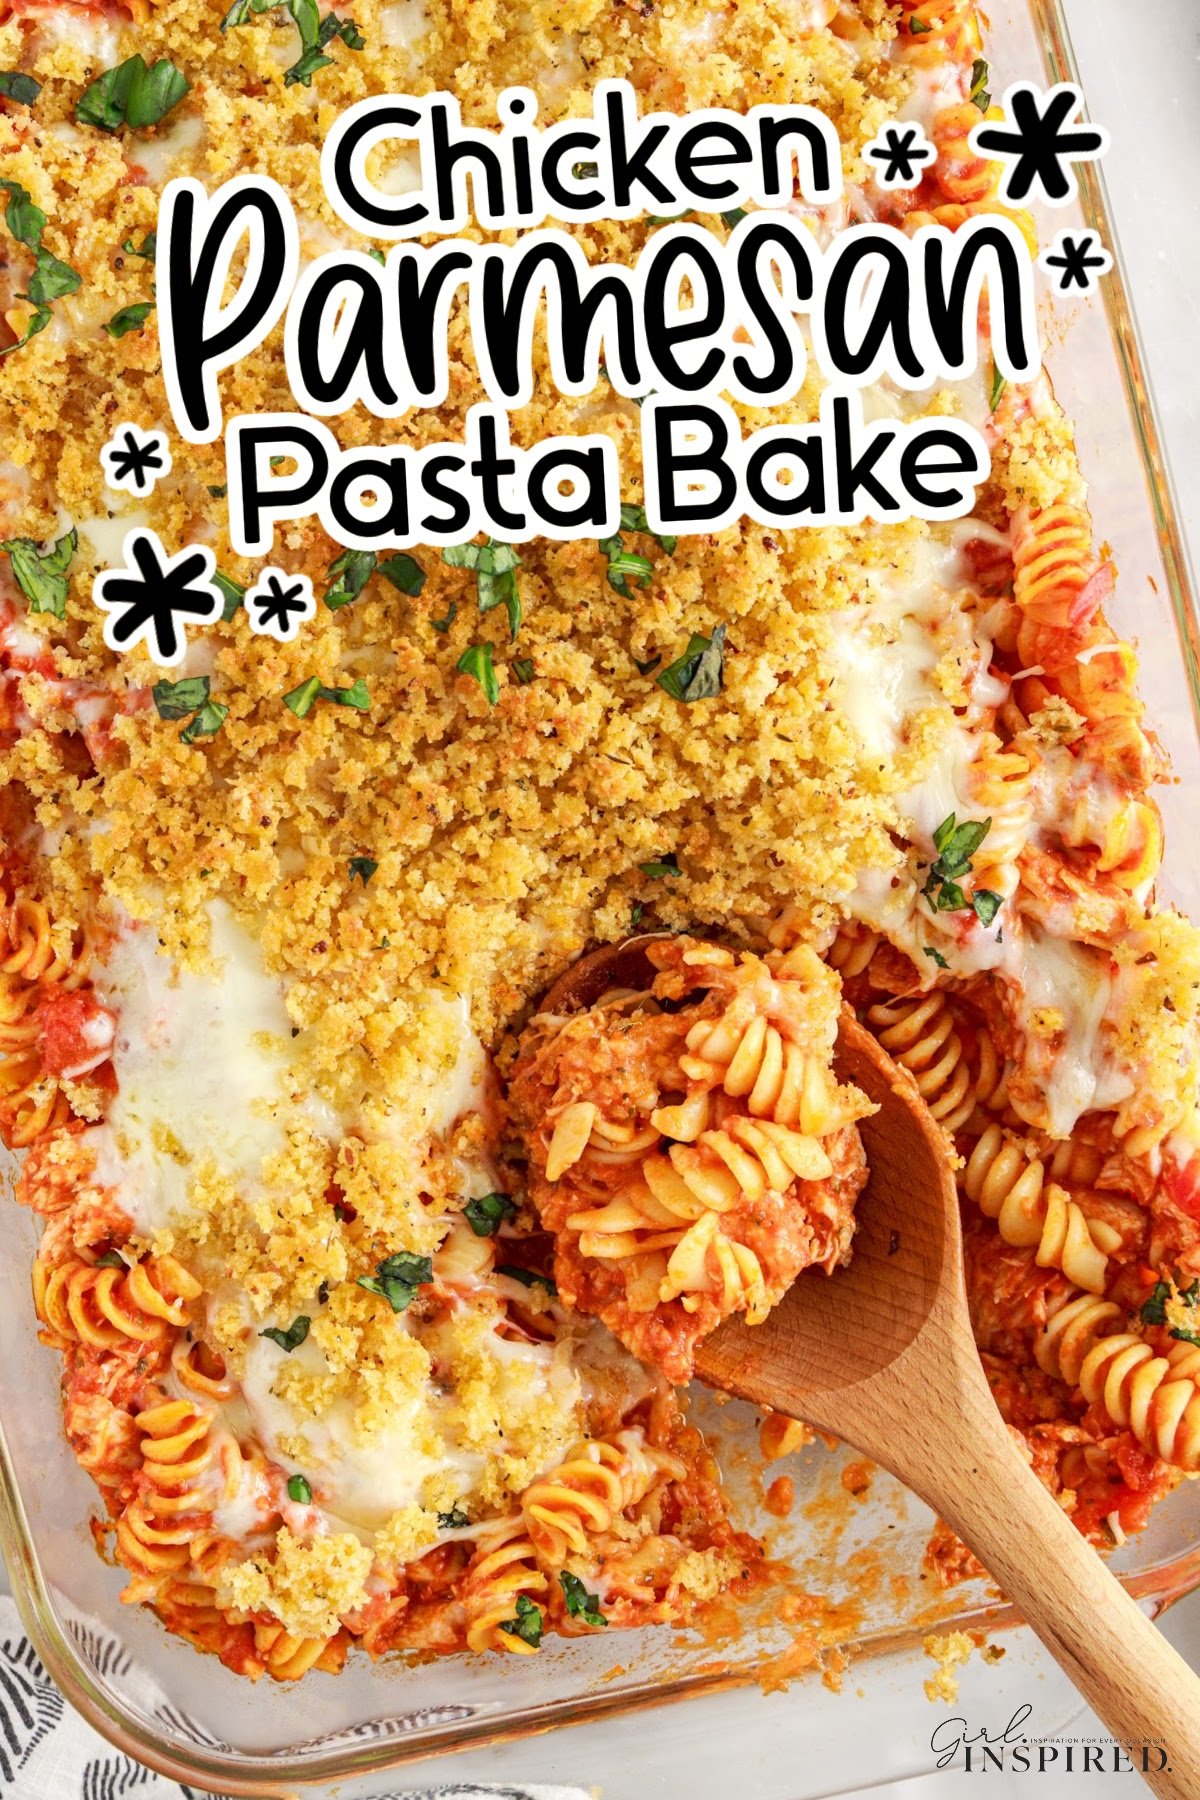 Chicken Parmesan Pasta Bake with panko crust and text overlay.